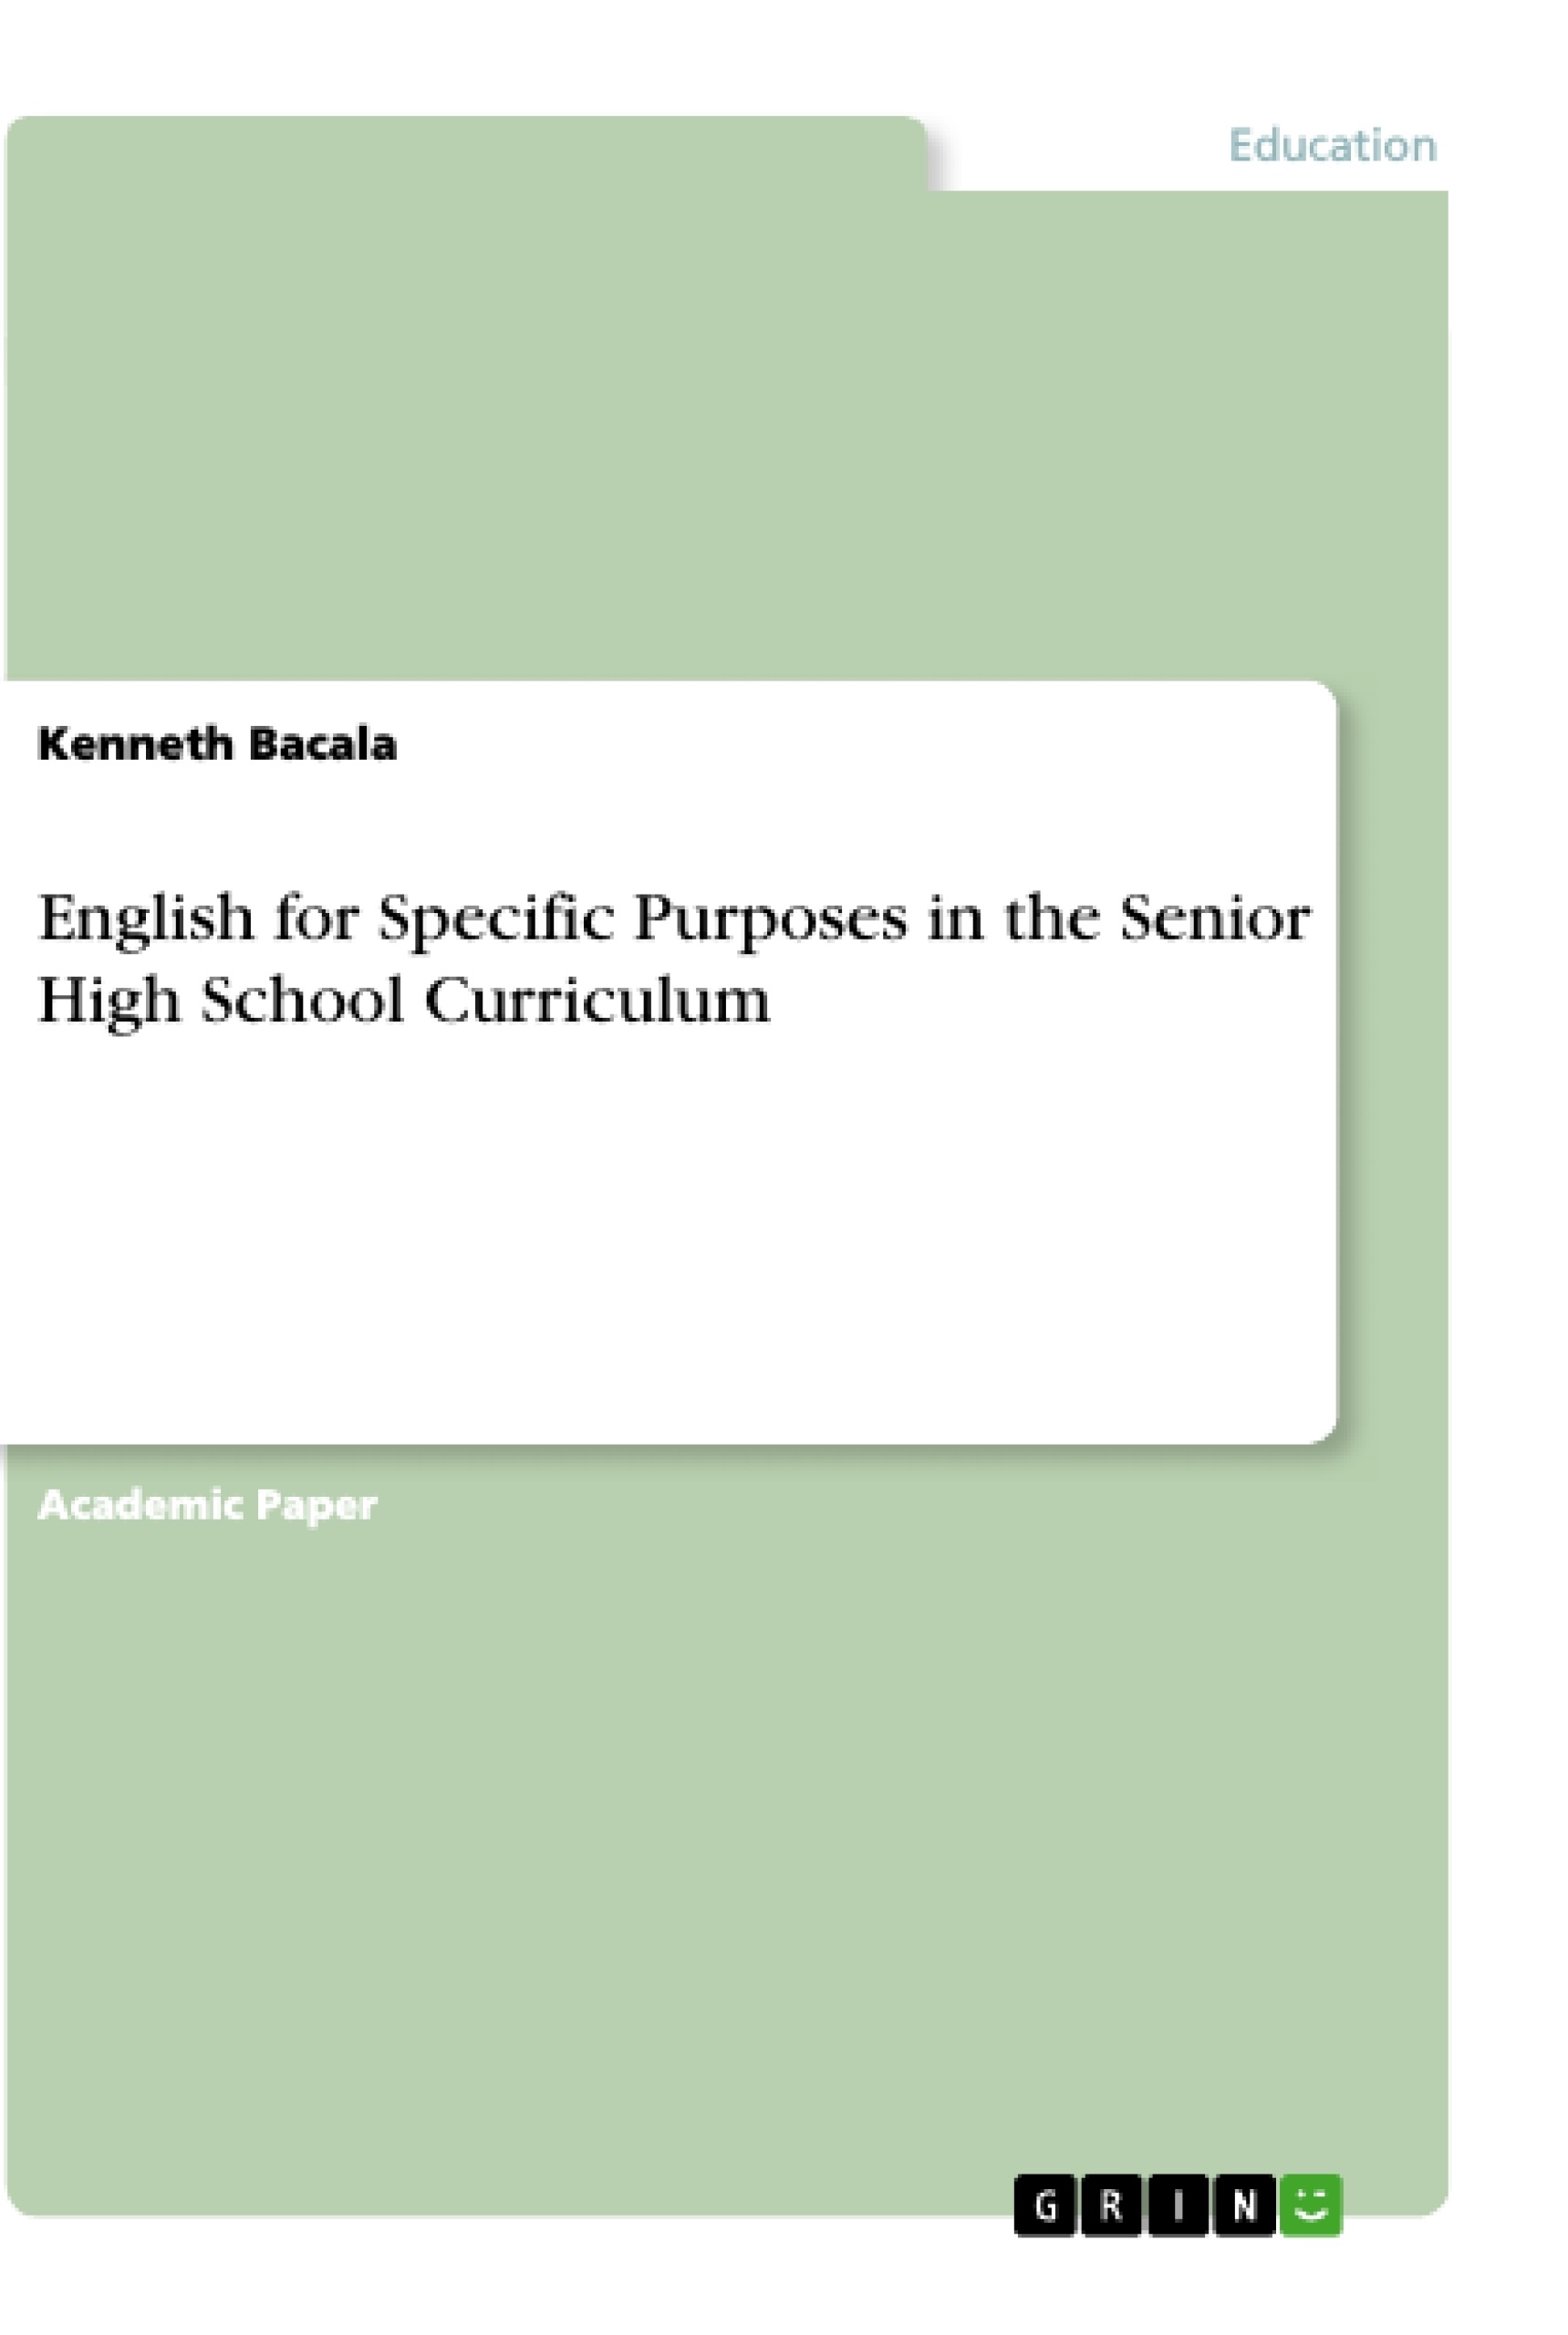 Title: English for Specific Purposes in the Senior High School Curriculum